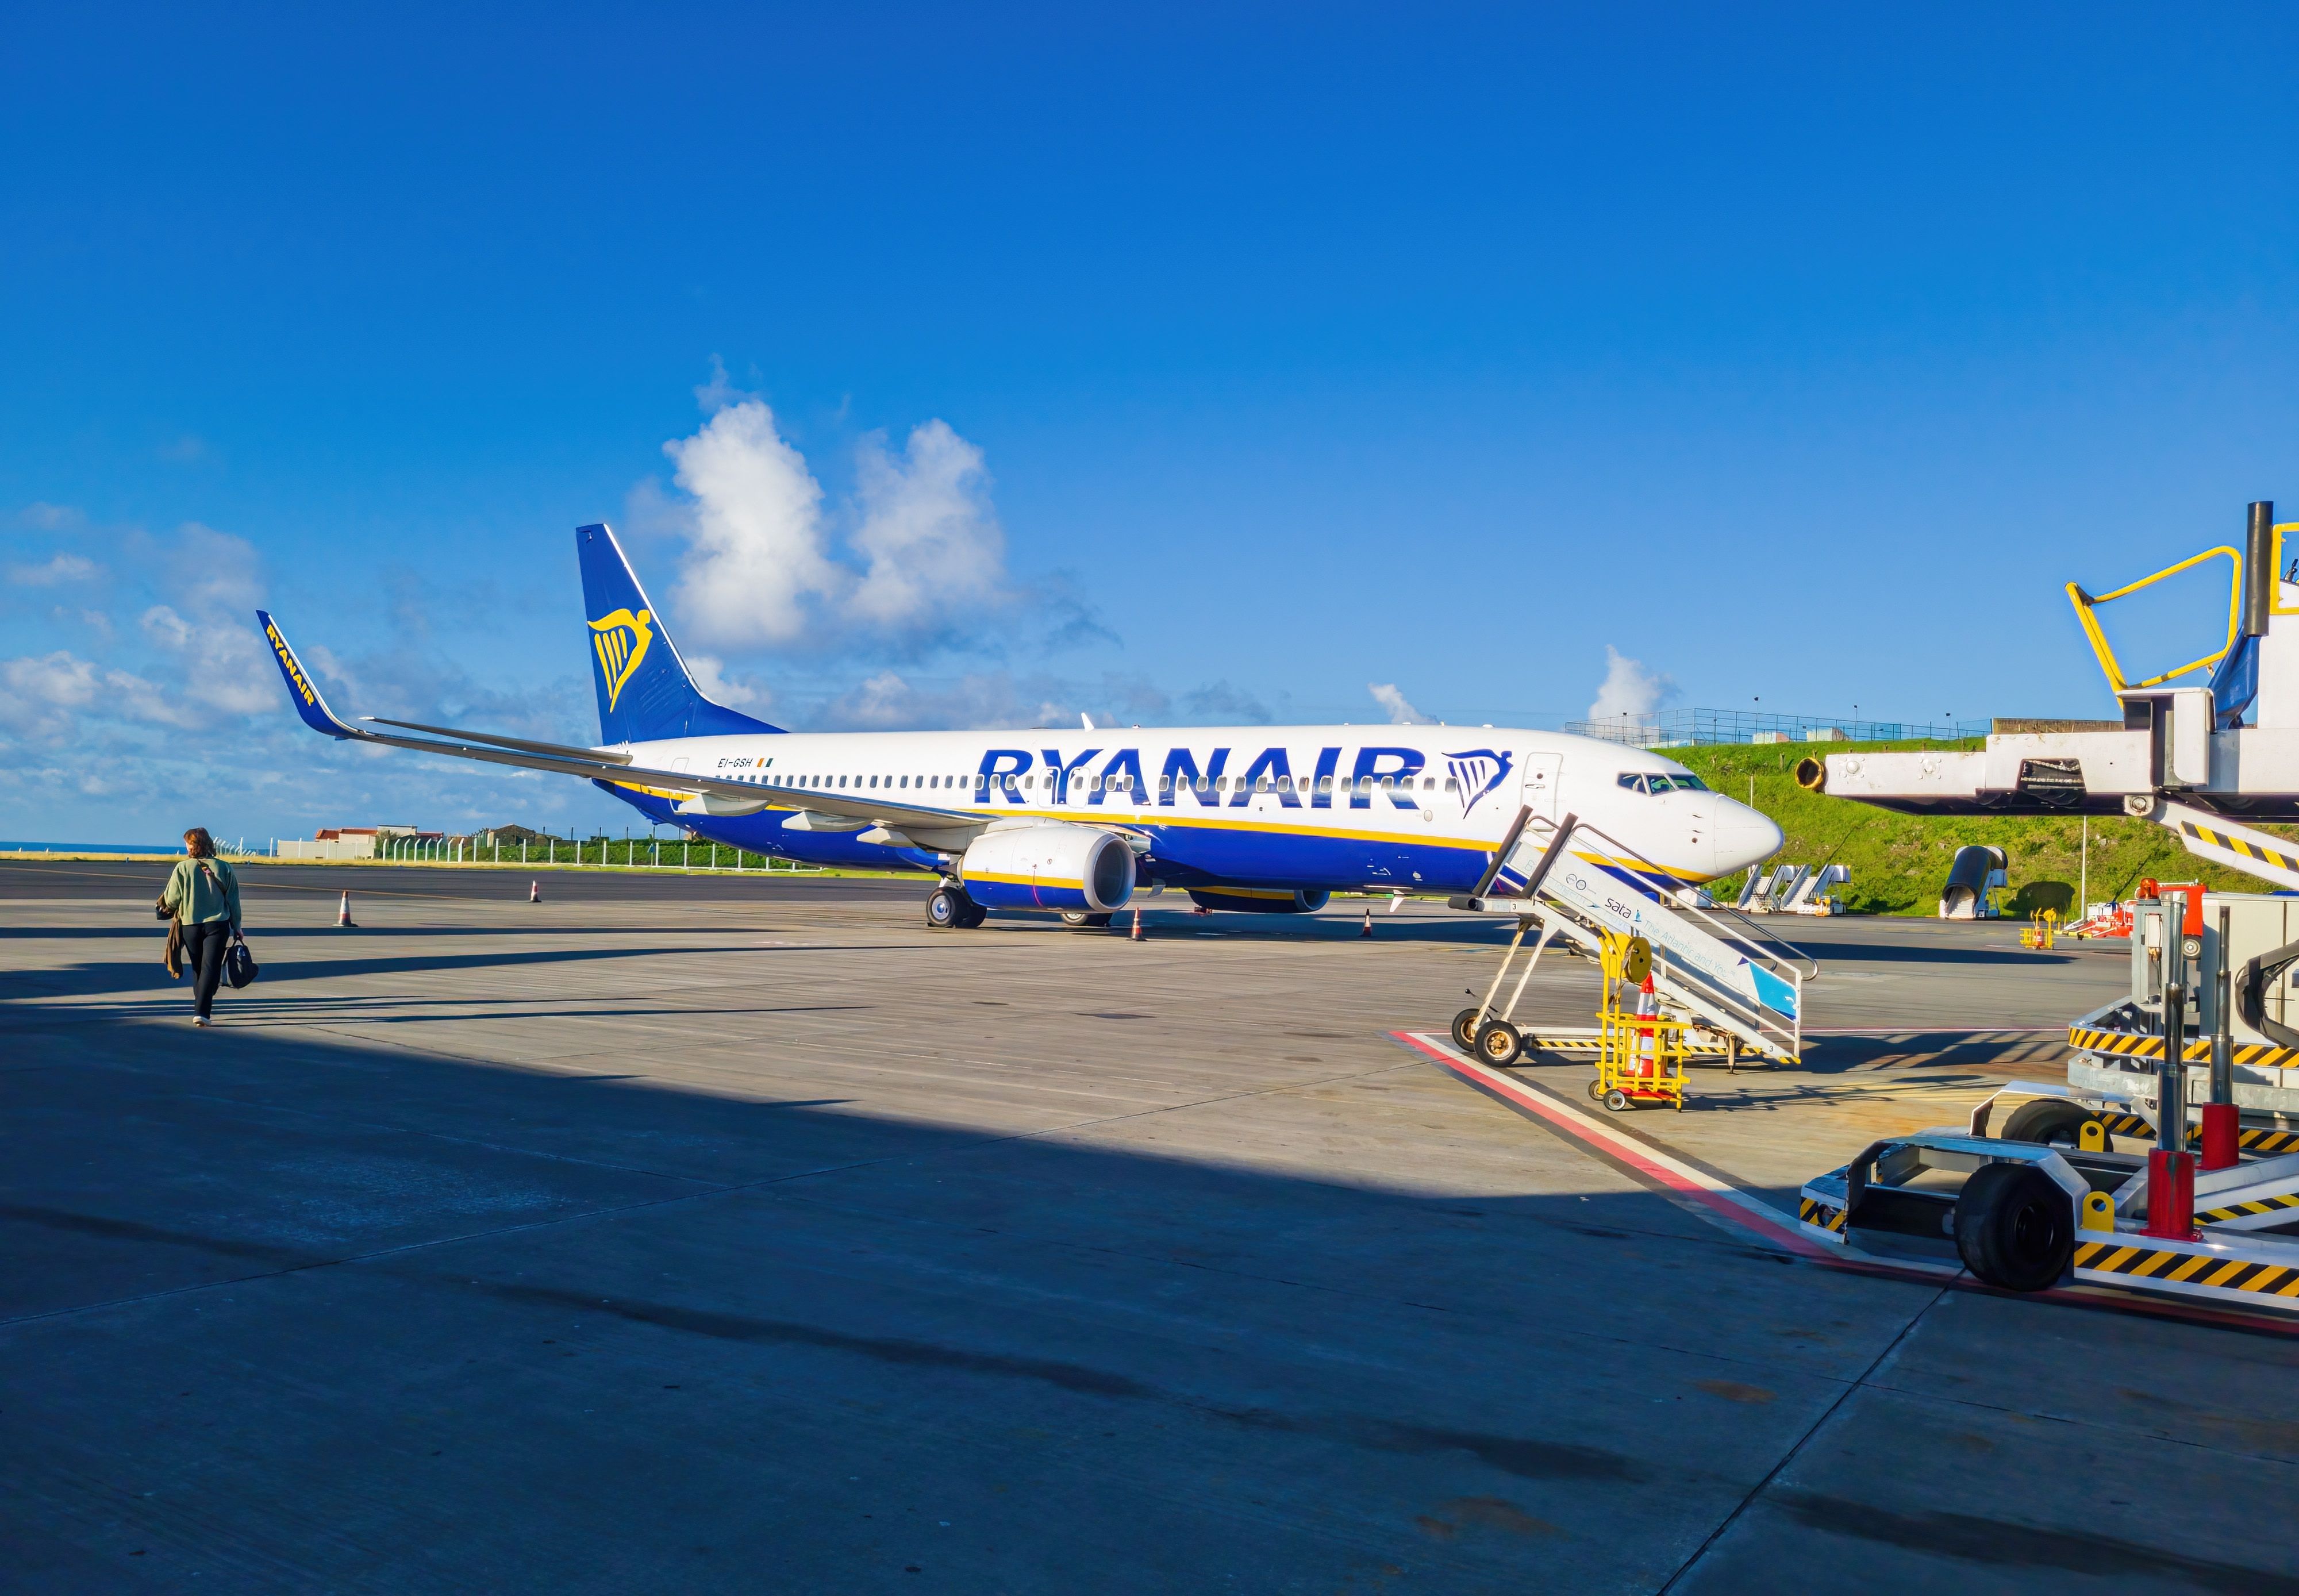 Ponta Delgada, Azores, December 4, 2022: Ryanair plane on the tarmac at International Joao Paulo II Airport on Sao Miguel Island in the Portuguese archipelago of the Azores.